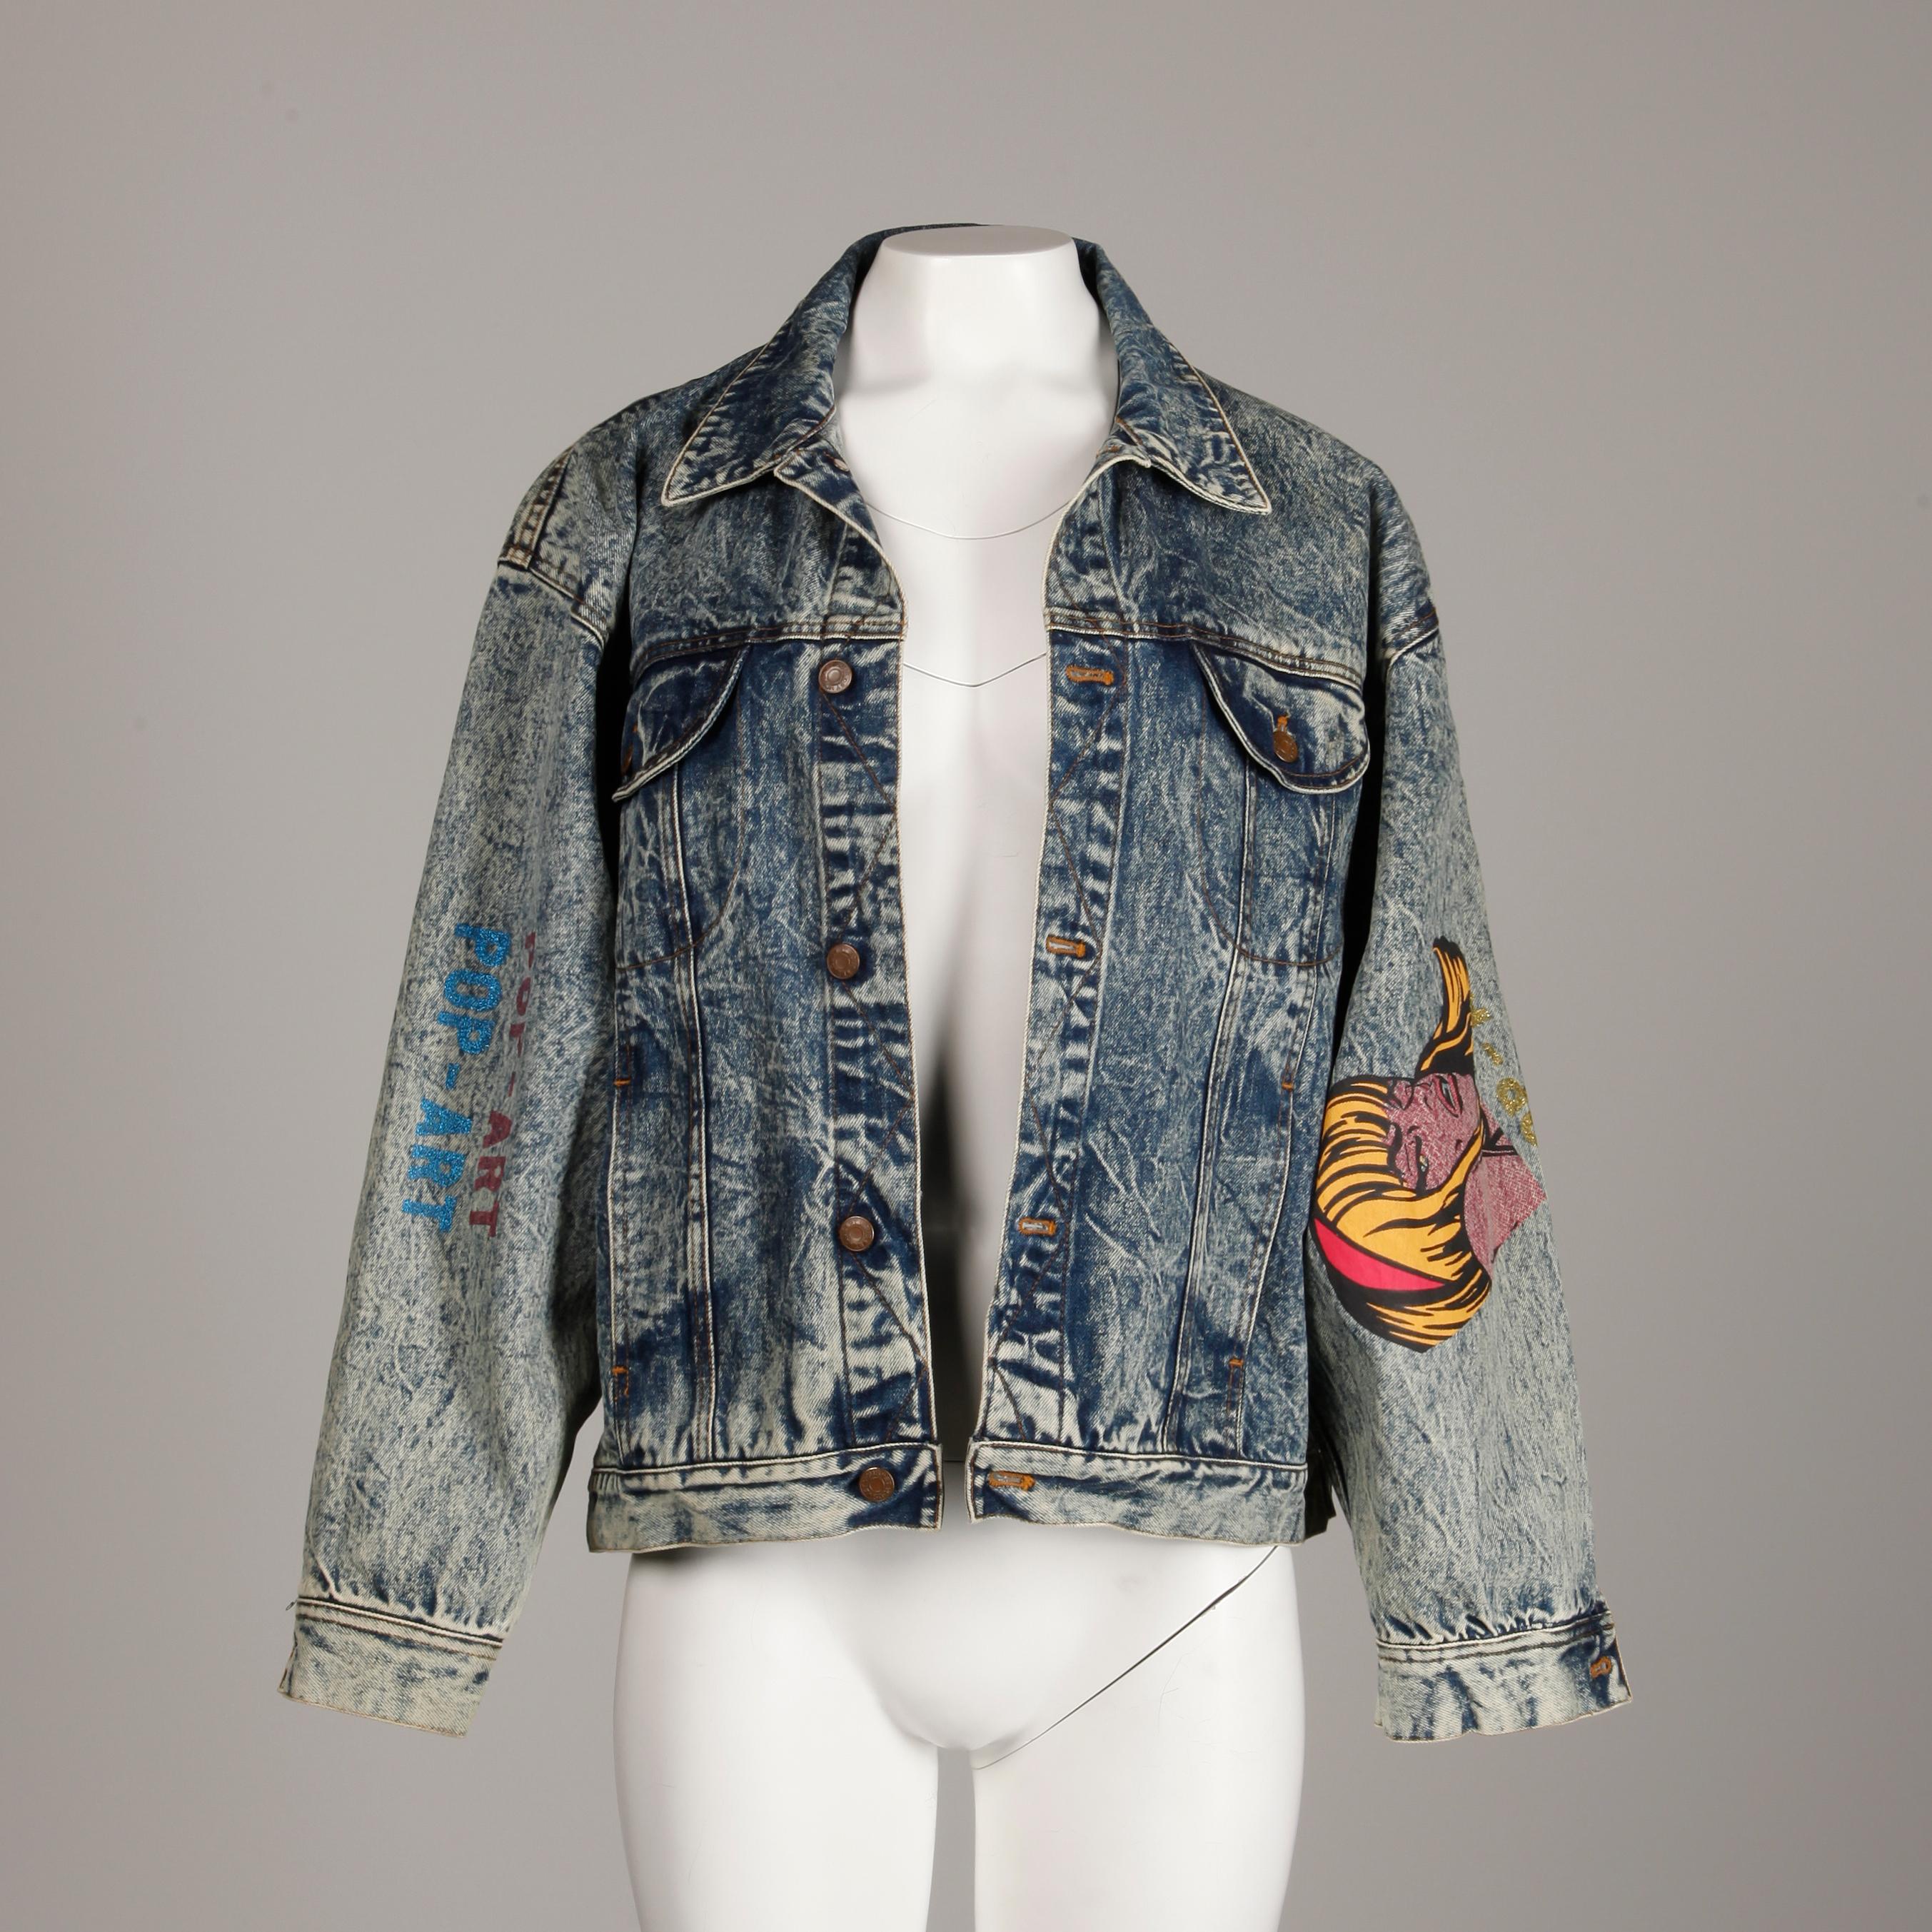 Absolutely incredible vintage 1980s pop art jacket by Et Vous with a comic book graphic and acid washed denim. Unlined with front button closure and button closure at wrists. 100% cotton. The marked size is 1, but the jacket will fit most sizes